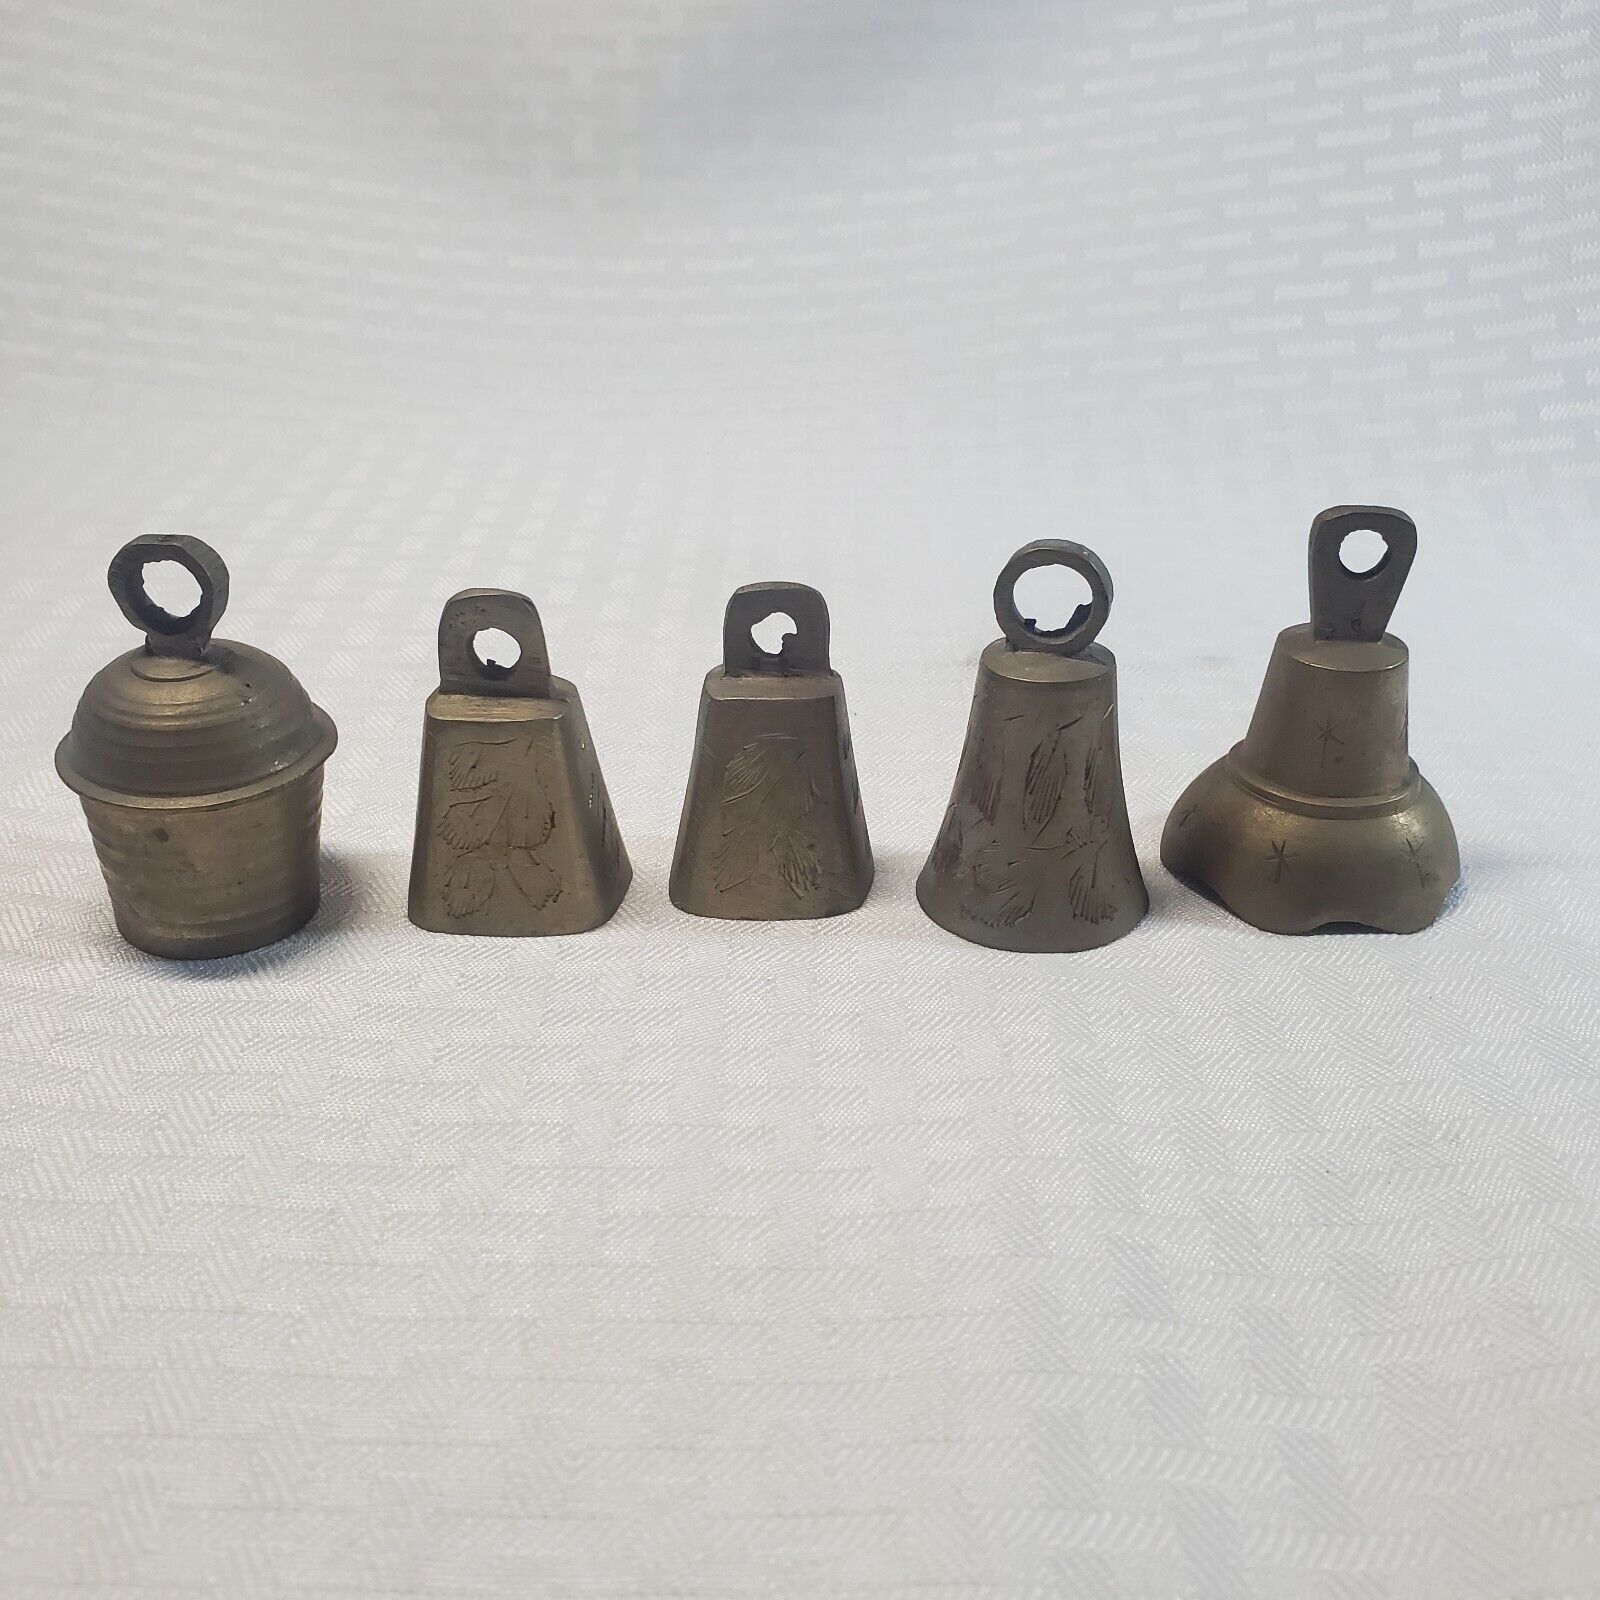 Lot of 5 Vintage Mini Brass Bells Marked India Decorated Slashes Carvings.